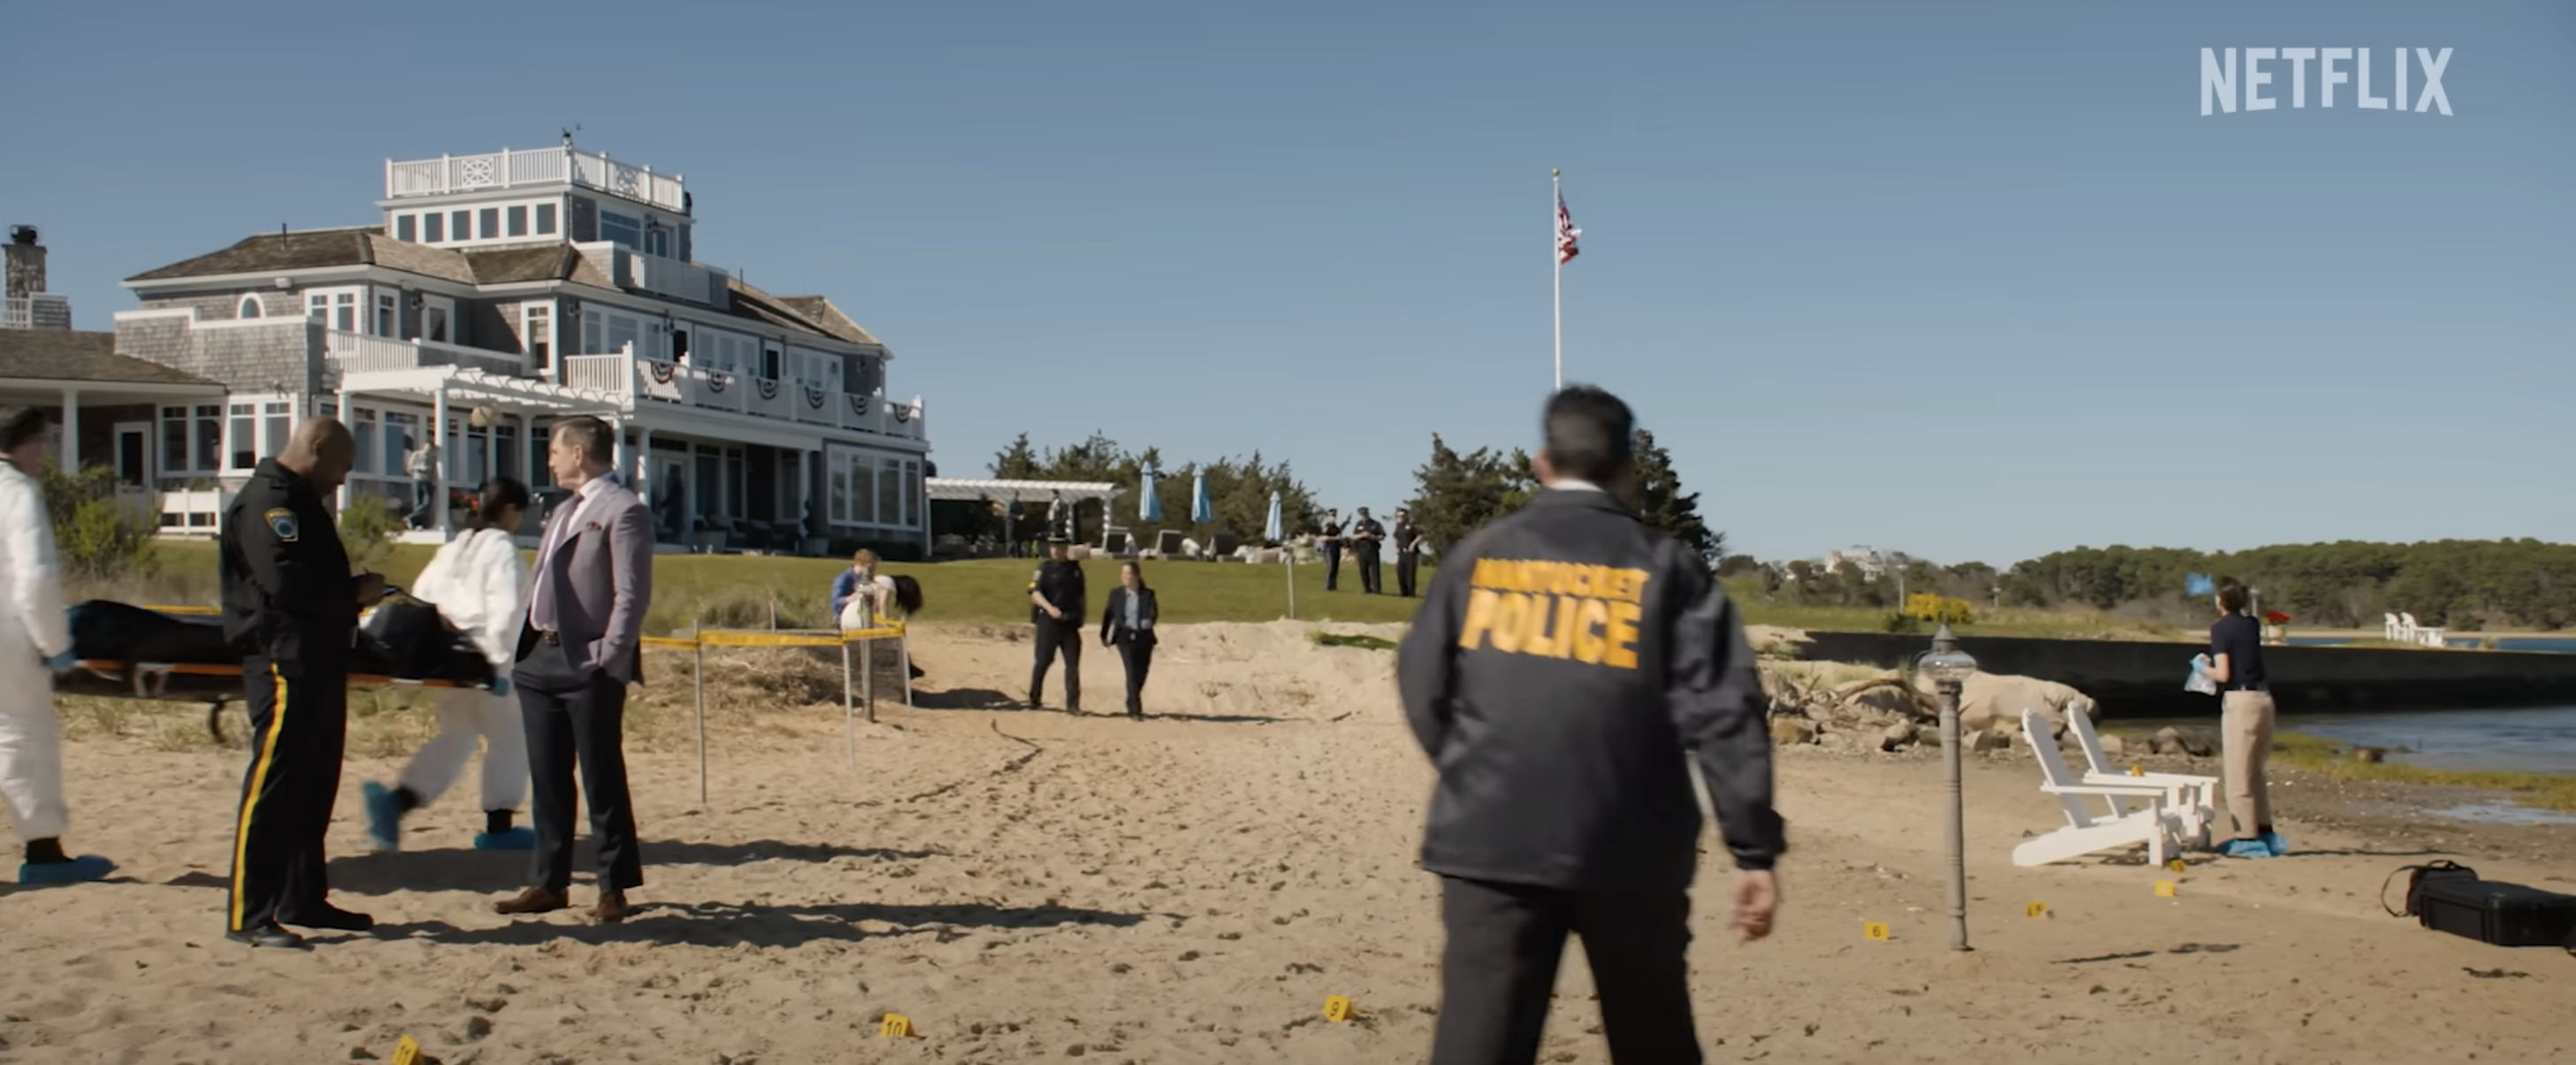 A crime scene near a beach, with investigators and police officers. A large house is in the background. Text in the top right reads &quot;NETFLIX.&quot;